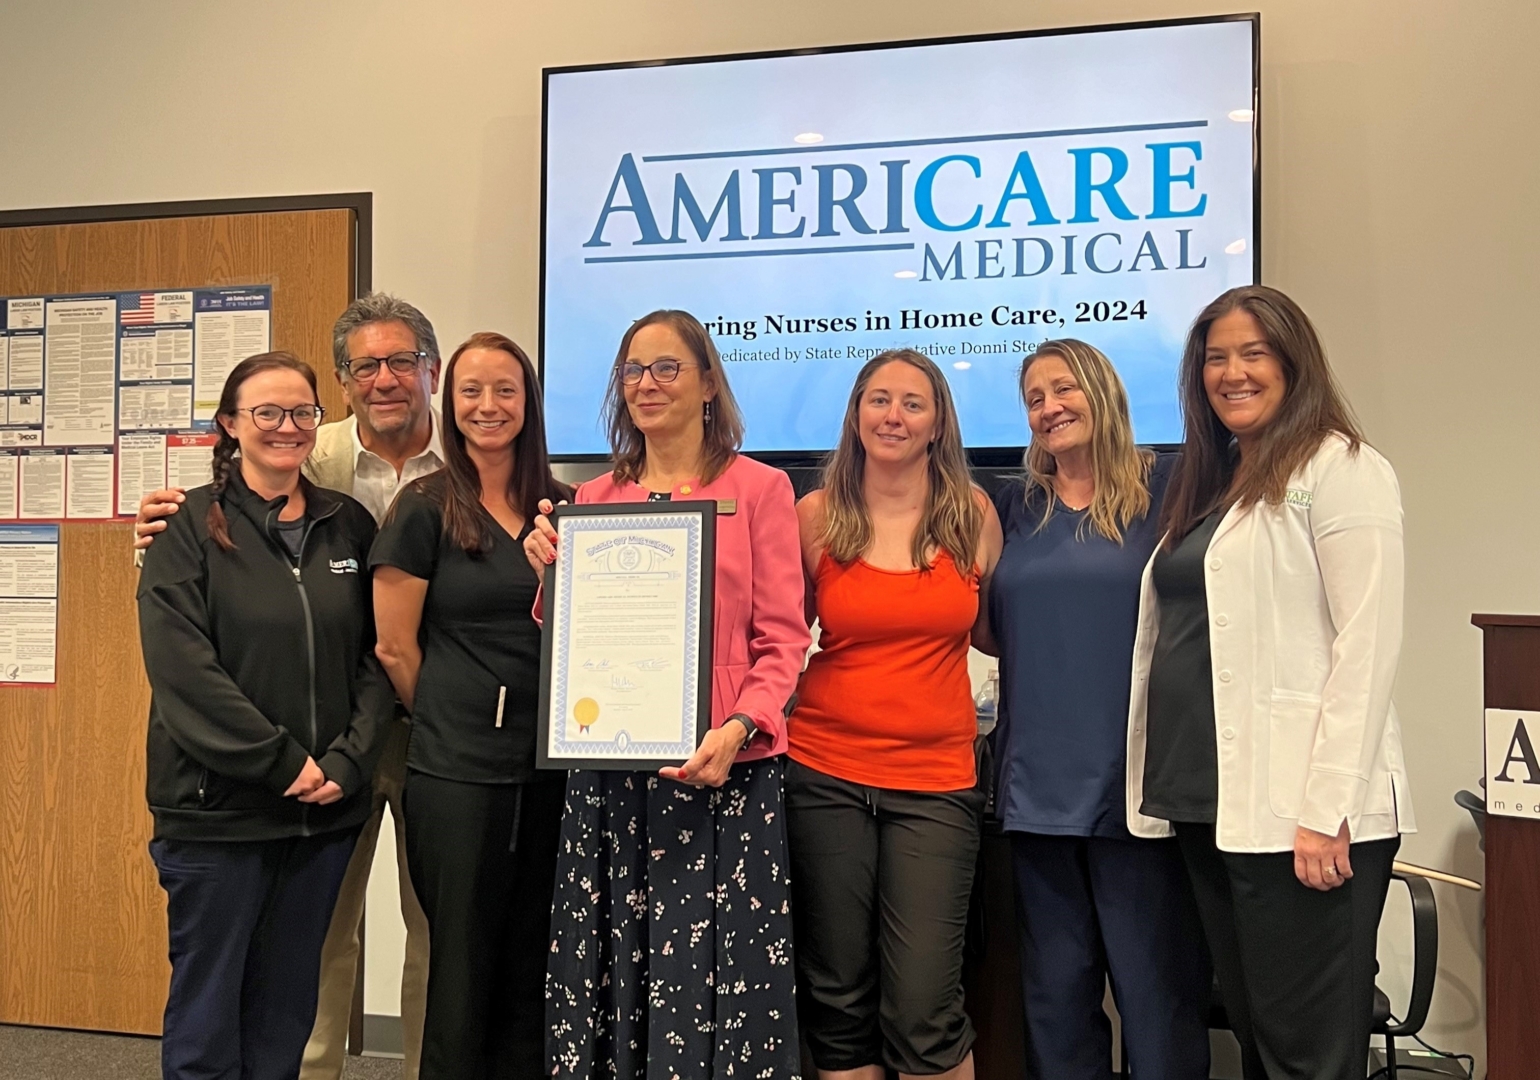 AmeriCare Medical, Inc., a leading provider of home healthcare services, has received recognition from the State of Michigan for their exceptional work in home care.